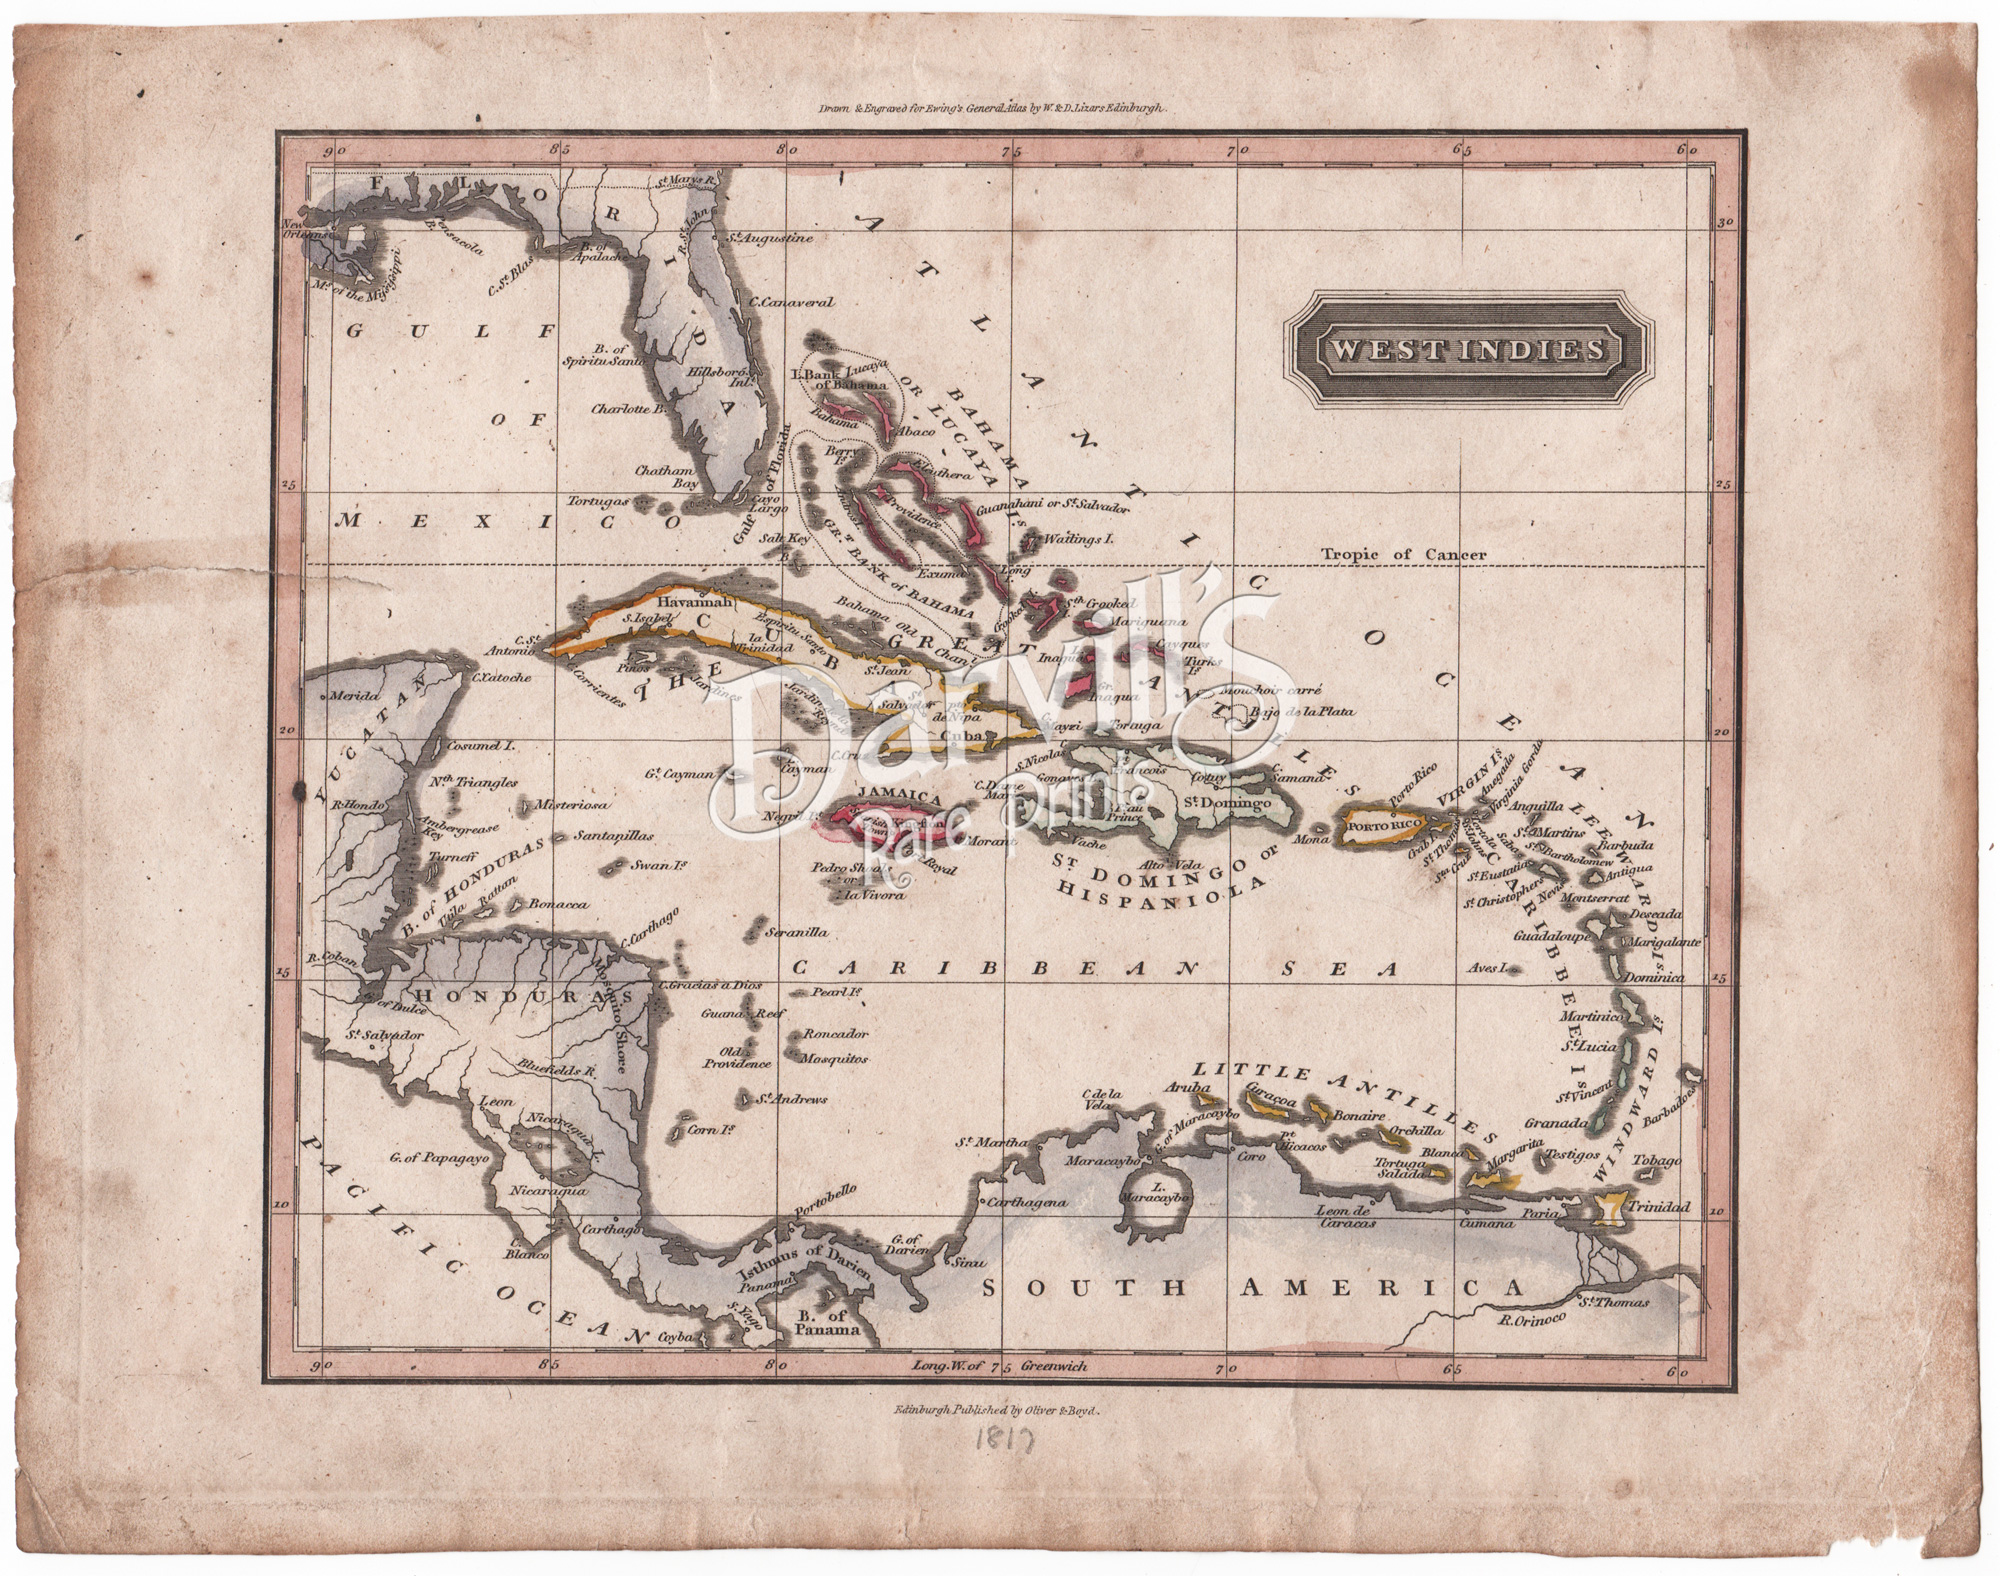 Antique maps of Mexico, the Caribbean (West Indies) and Central America